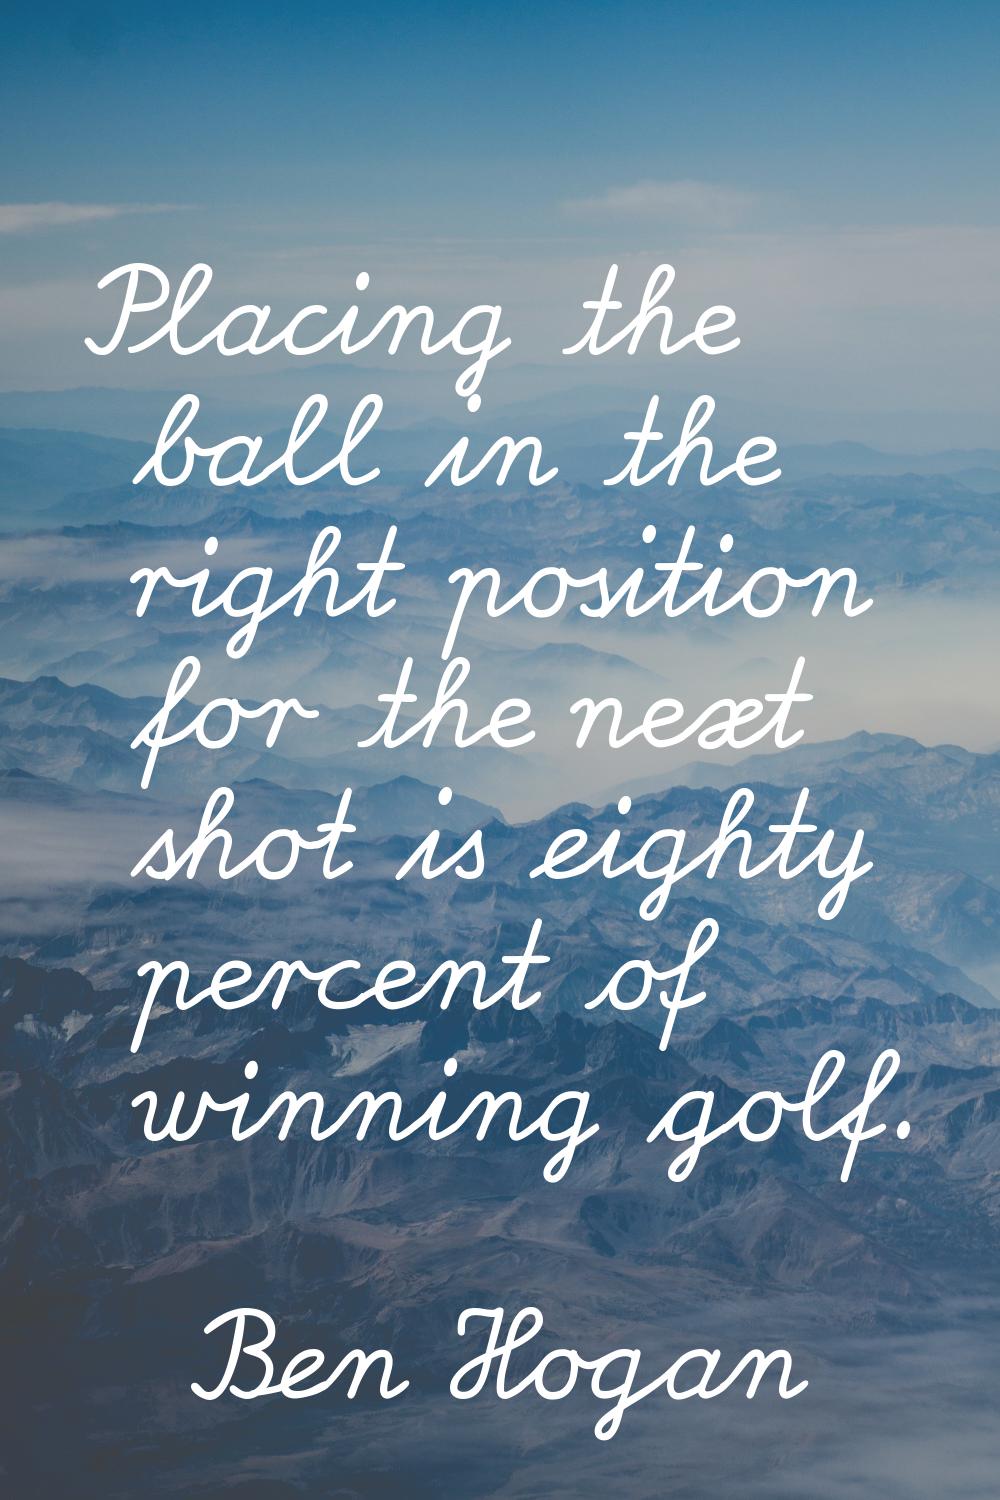 Placing the ball in the right position for the next shot is eighty percent of winning golf.